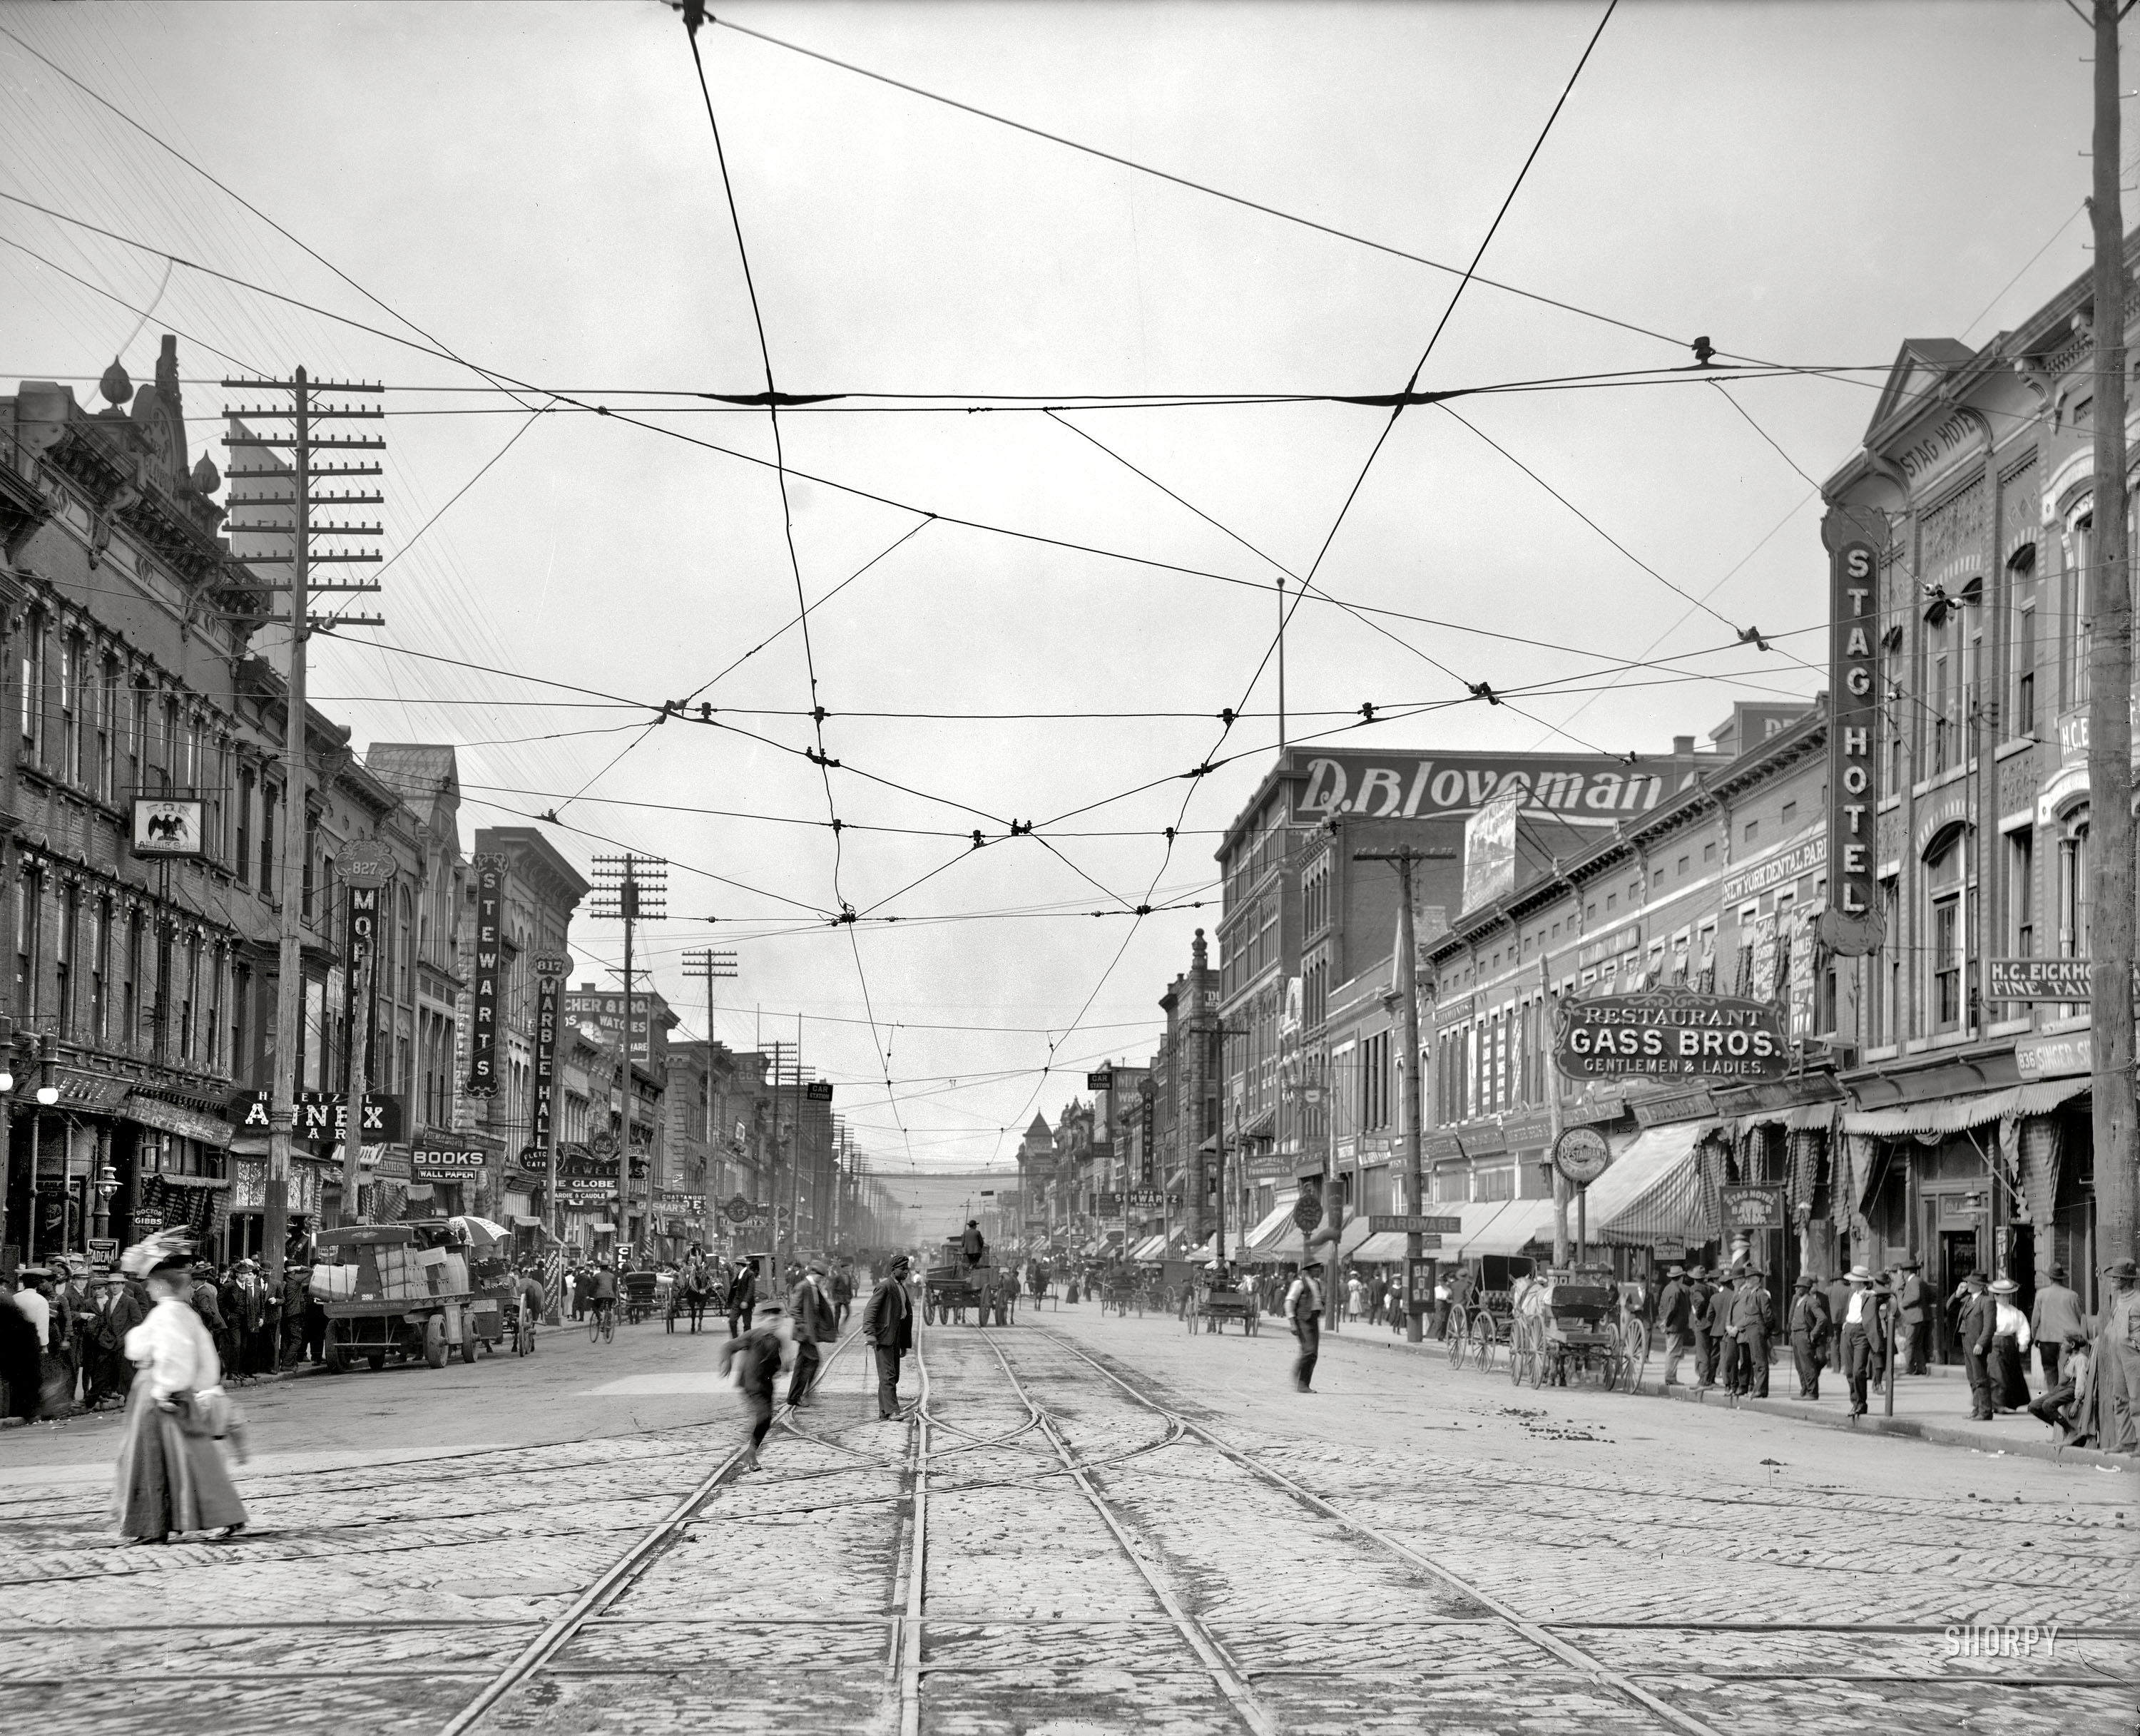 Chattanooga, Tennessee, circa 1907. "Market Square." Beneath a cat's cradle of streetcar wires, we have a nice selection of restaurants and dental parlors. 8x10 inch dry plate glass negative, Detroit Publishing Company. View full size.